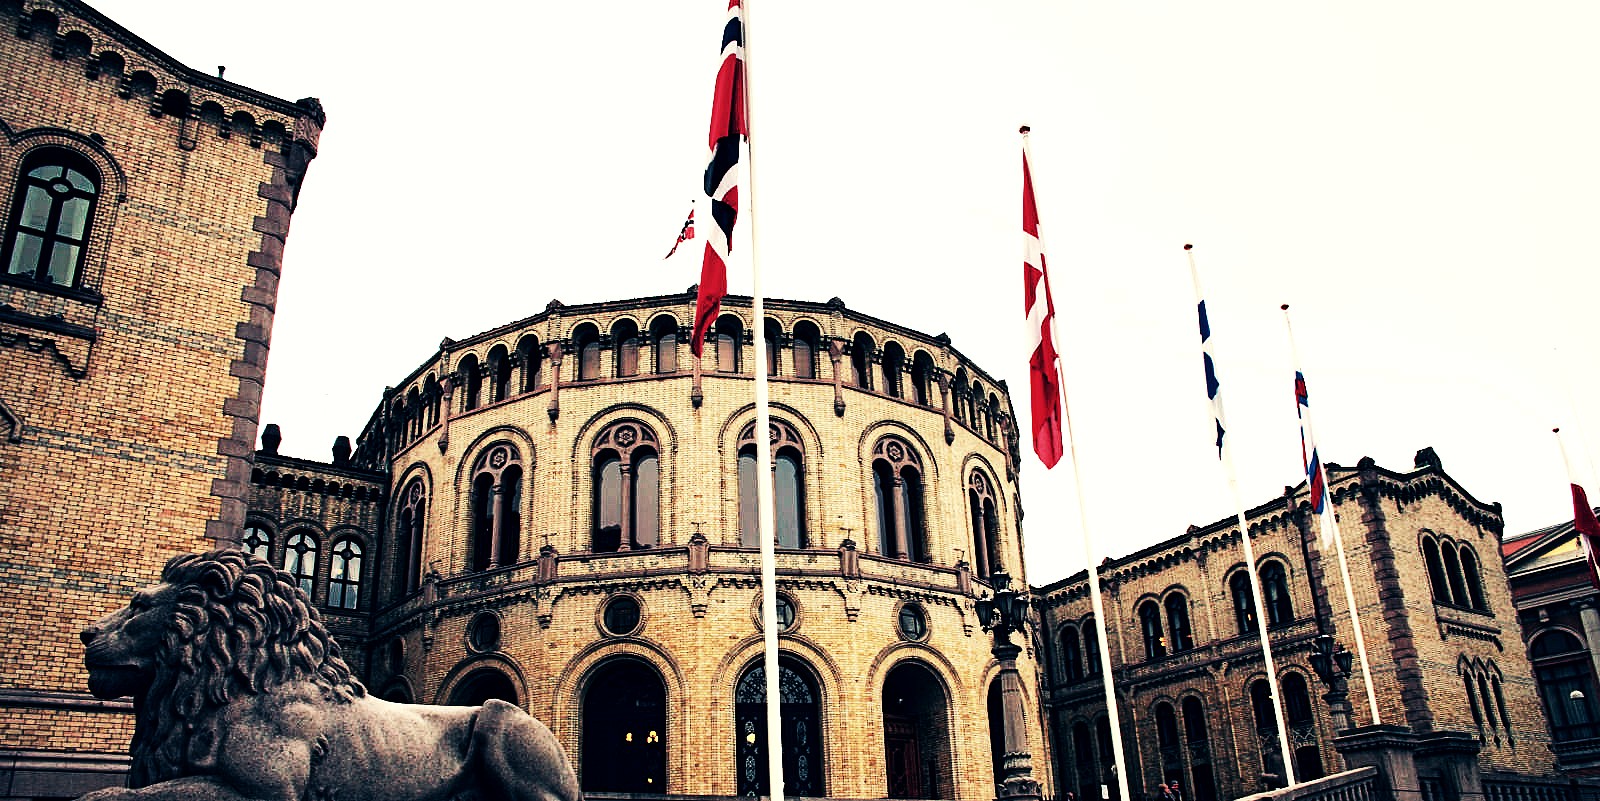 Hackers breached Norwegian Parliament emails to steal data